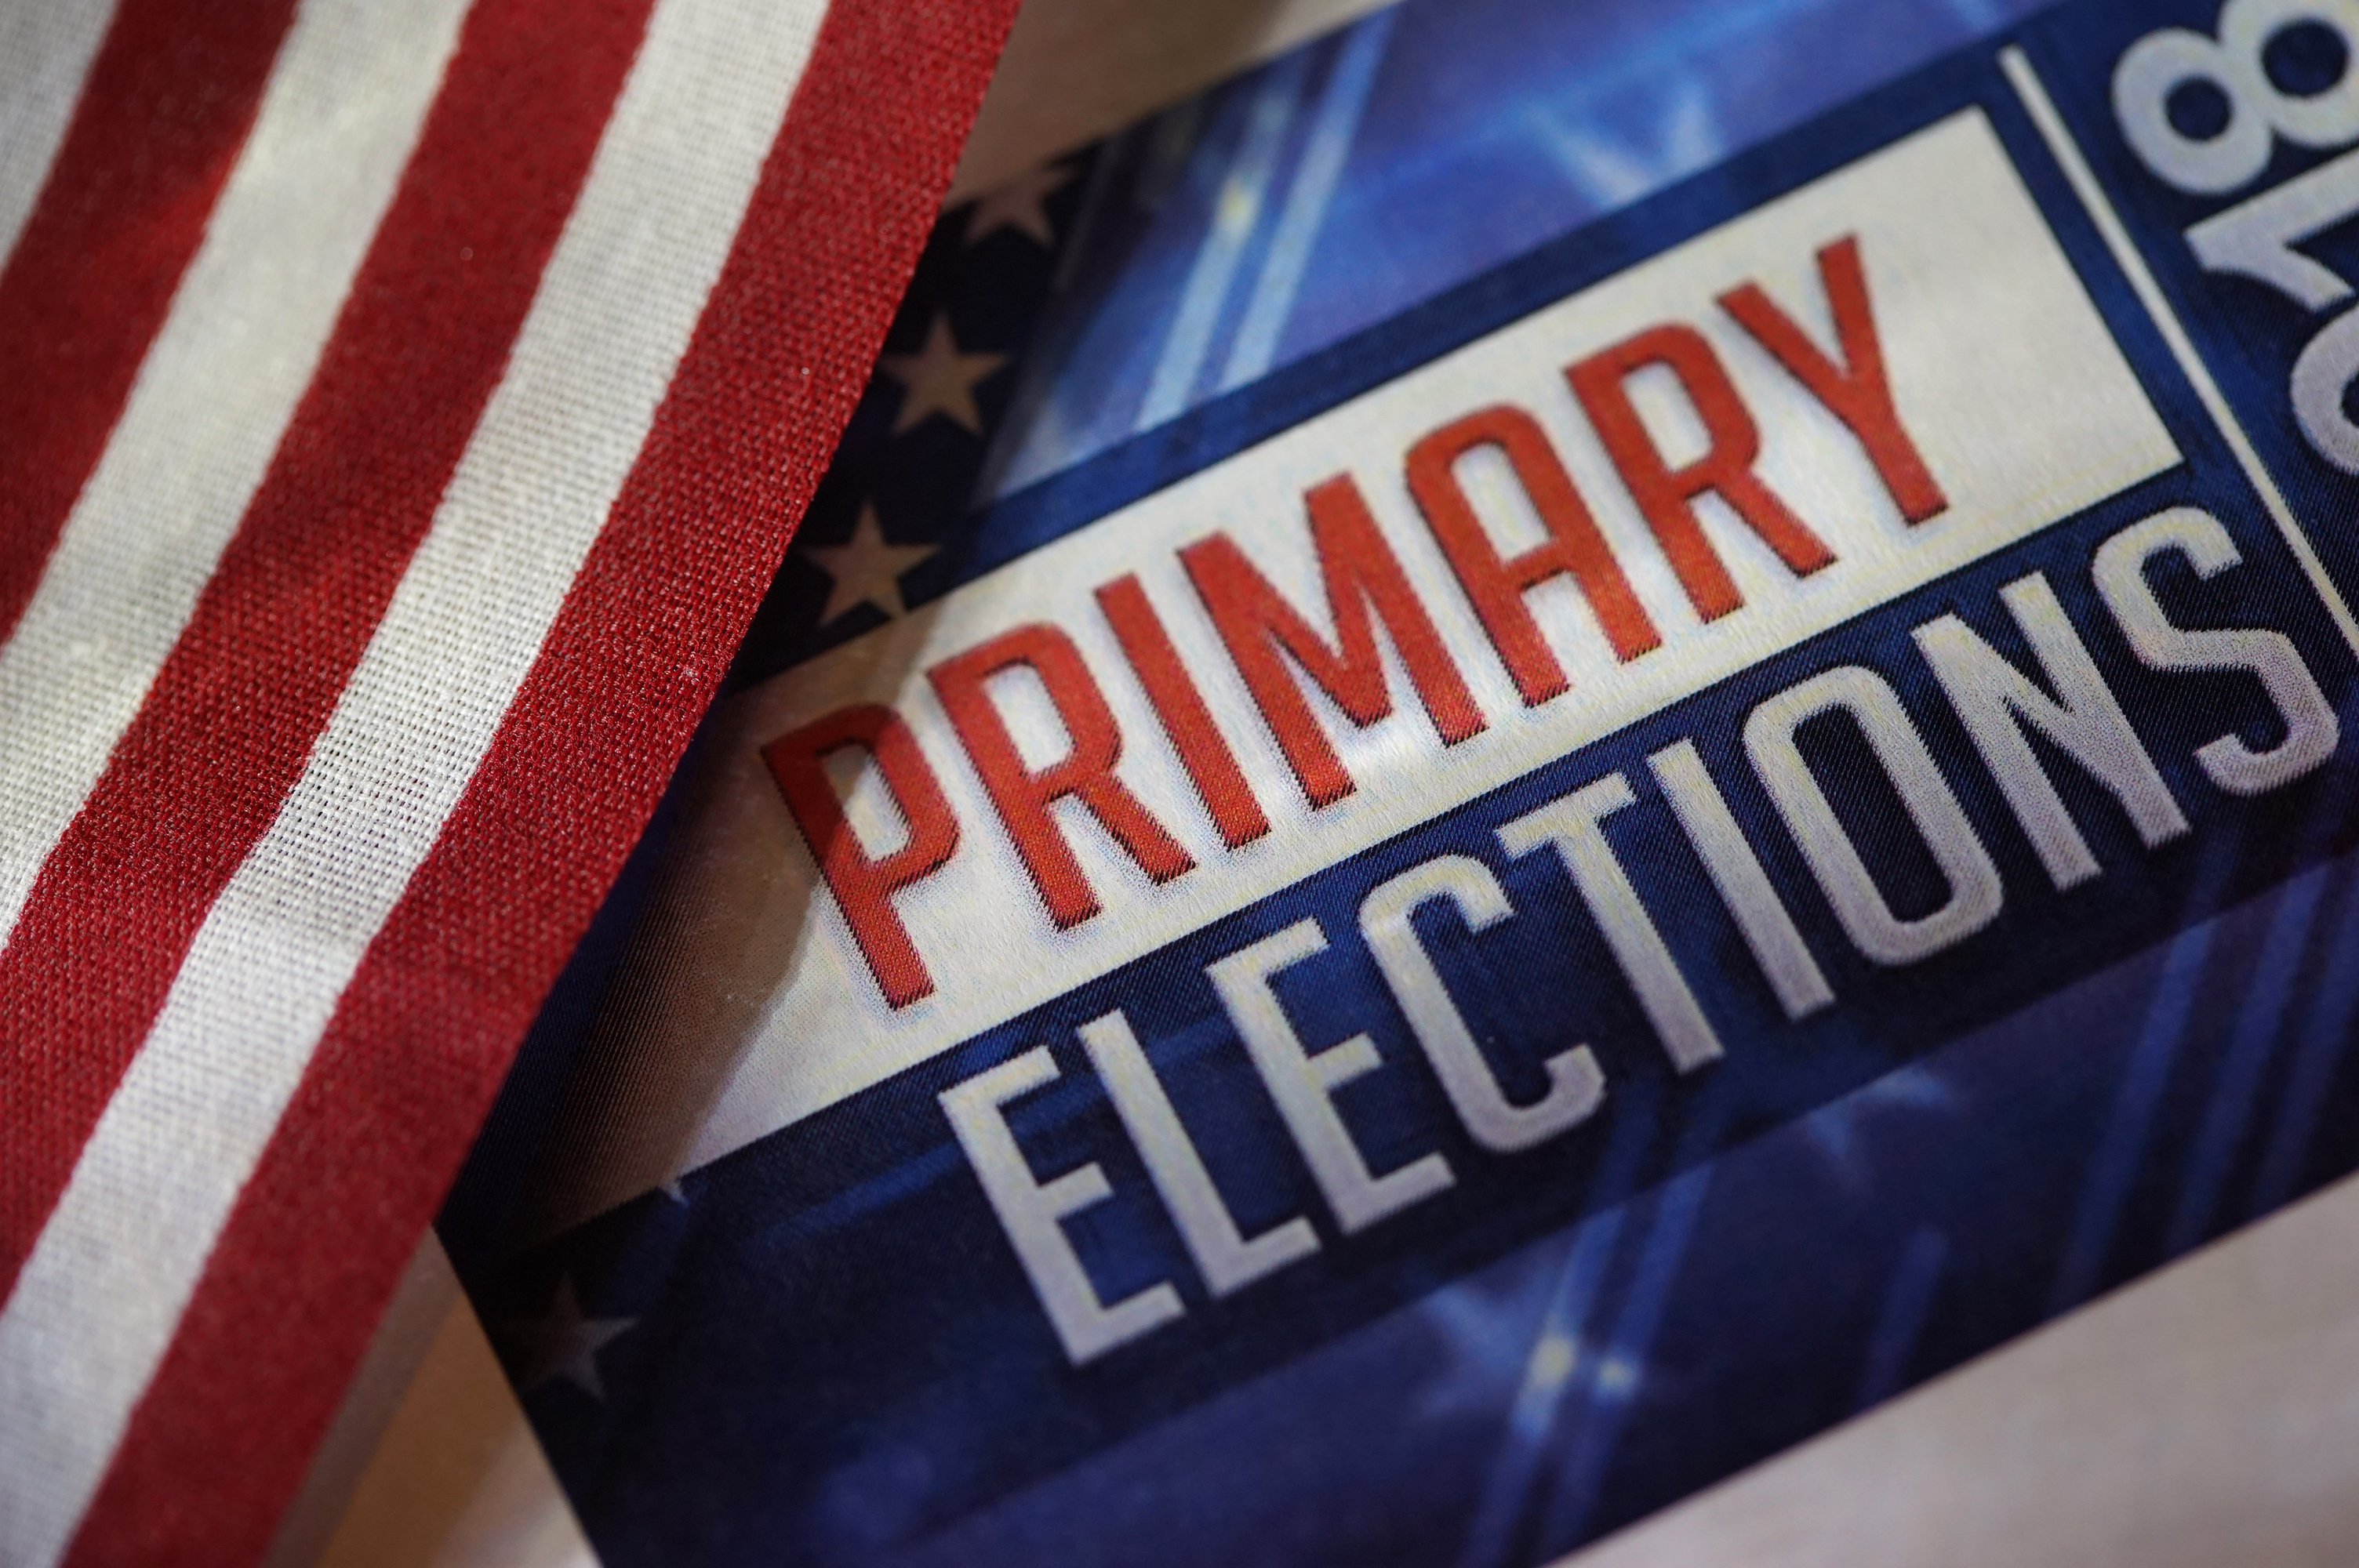 primary elections